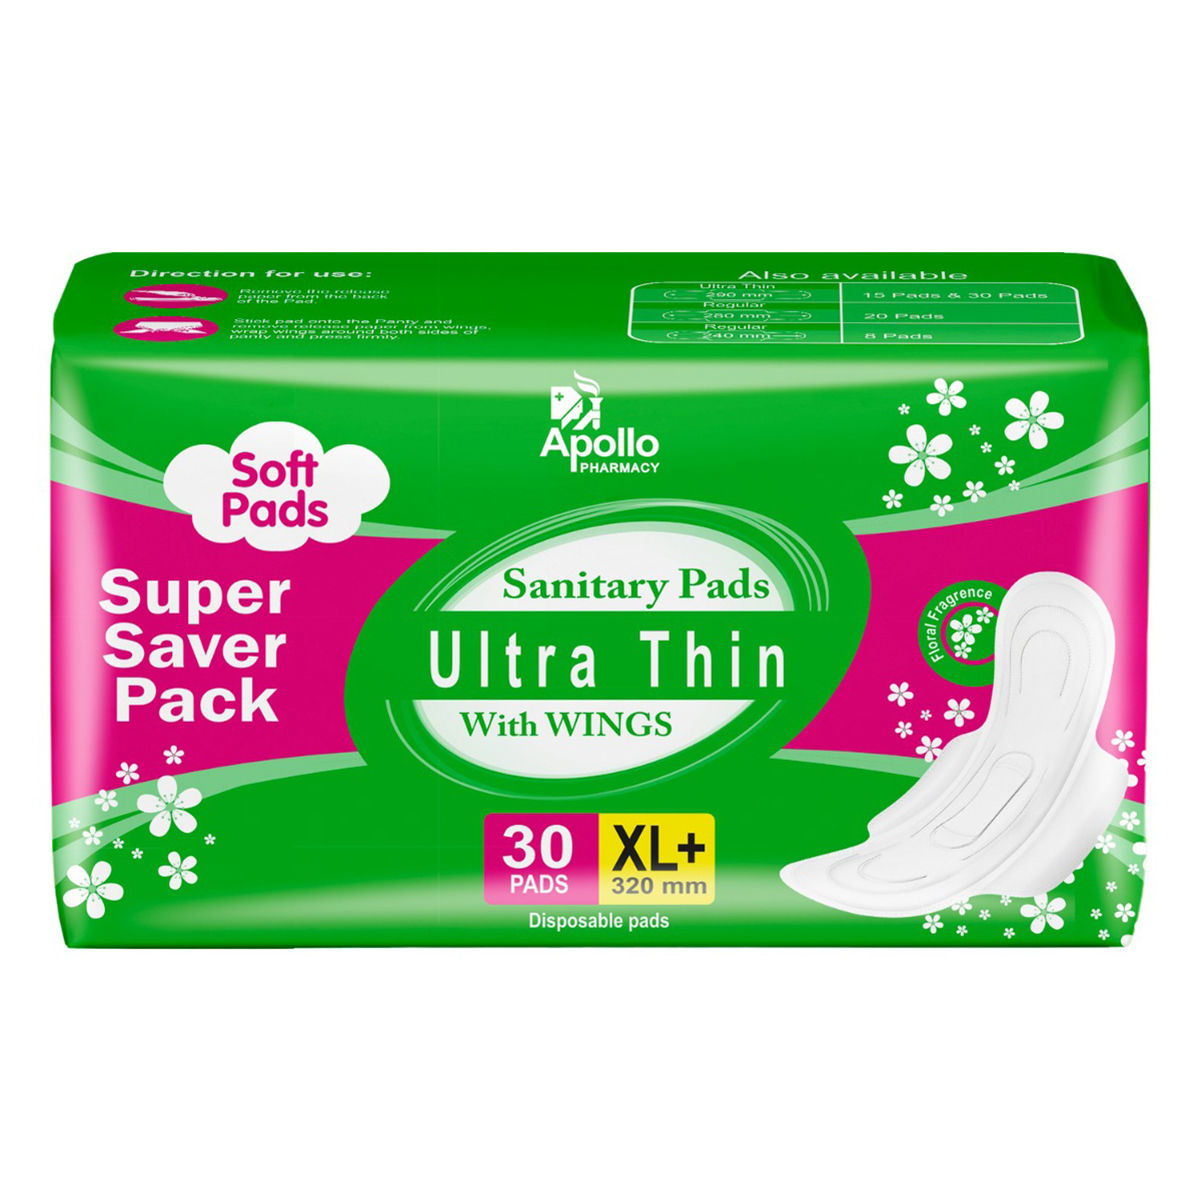 Buy Apollo Pharmacy Ultrathin Sanitary Pads XL+ with Wings, 30 Count Online